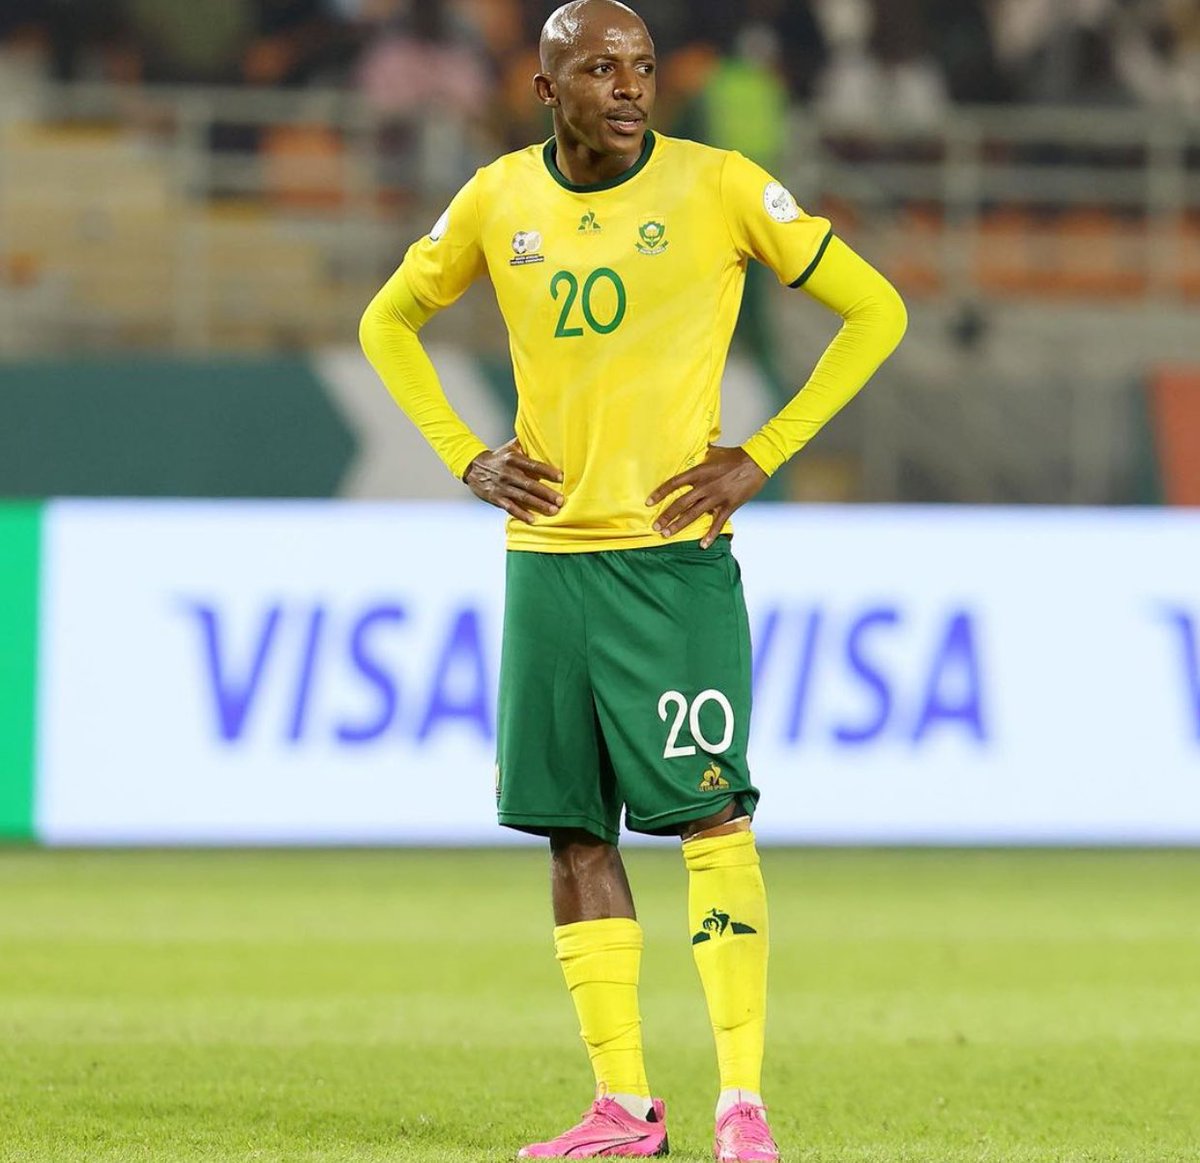 I so wish Khuliso Mudau could get offers abroad in big leagues because WOW!… We have a best right back in Africa bafethu! The man has been phenomenal throughout the AFCON tournament even during the qualifiers! This has been his season!